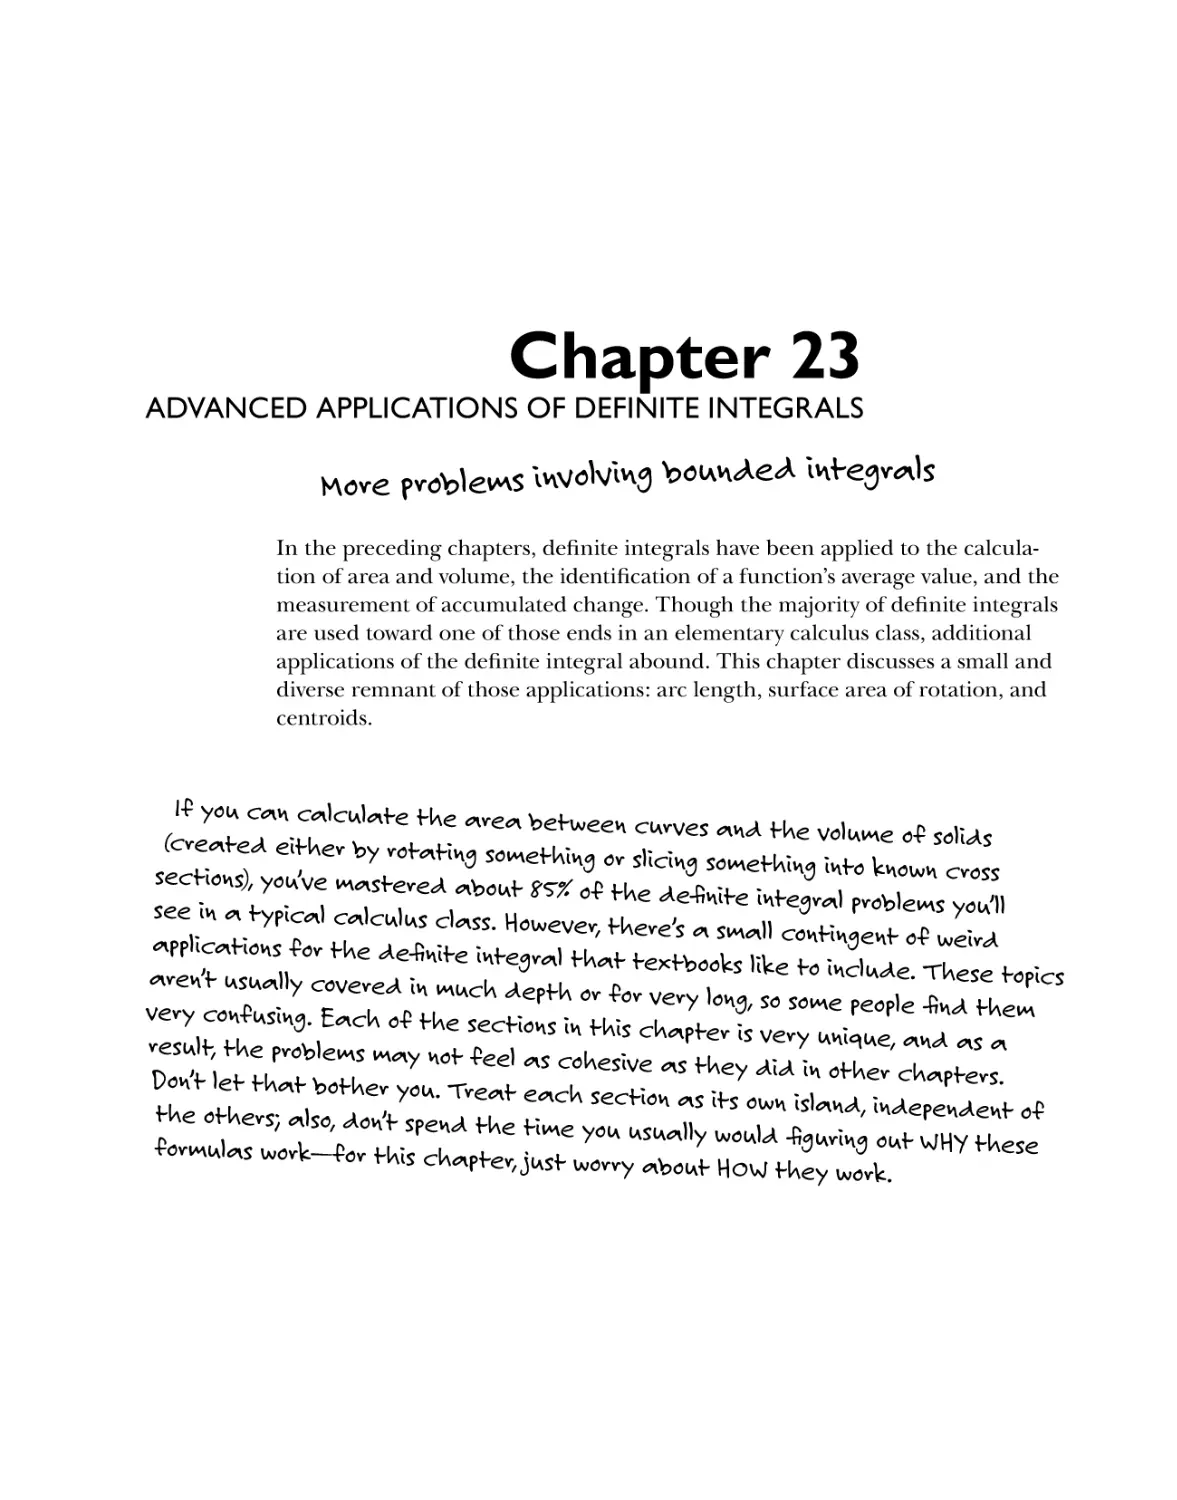 Chapter 23: Advanced Applications of Definite Integrals 423